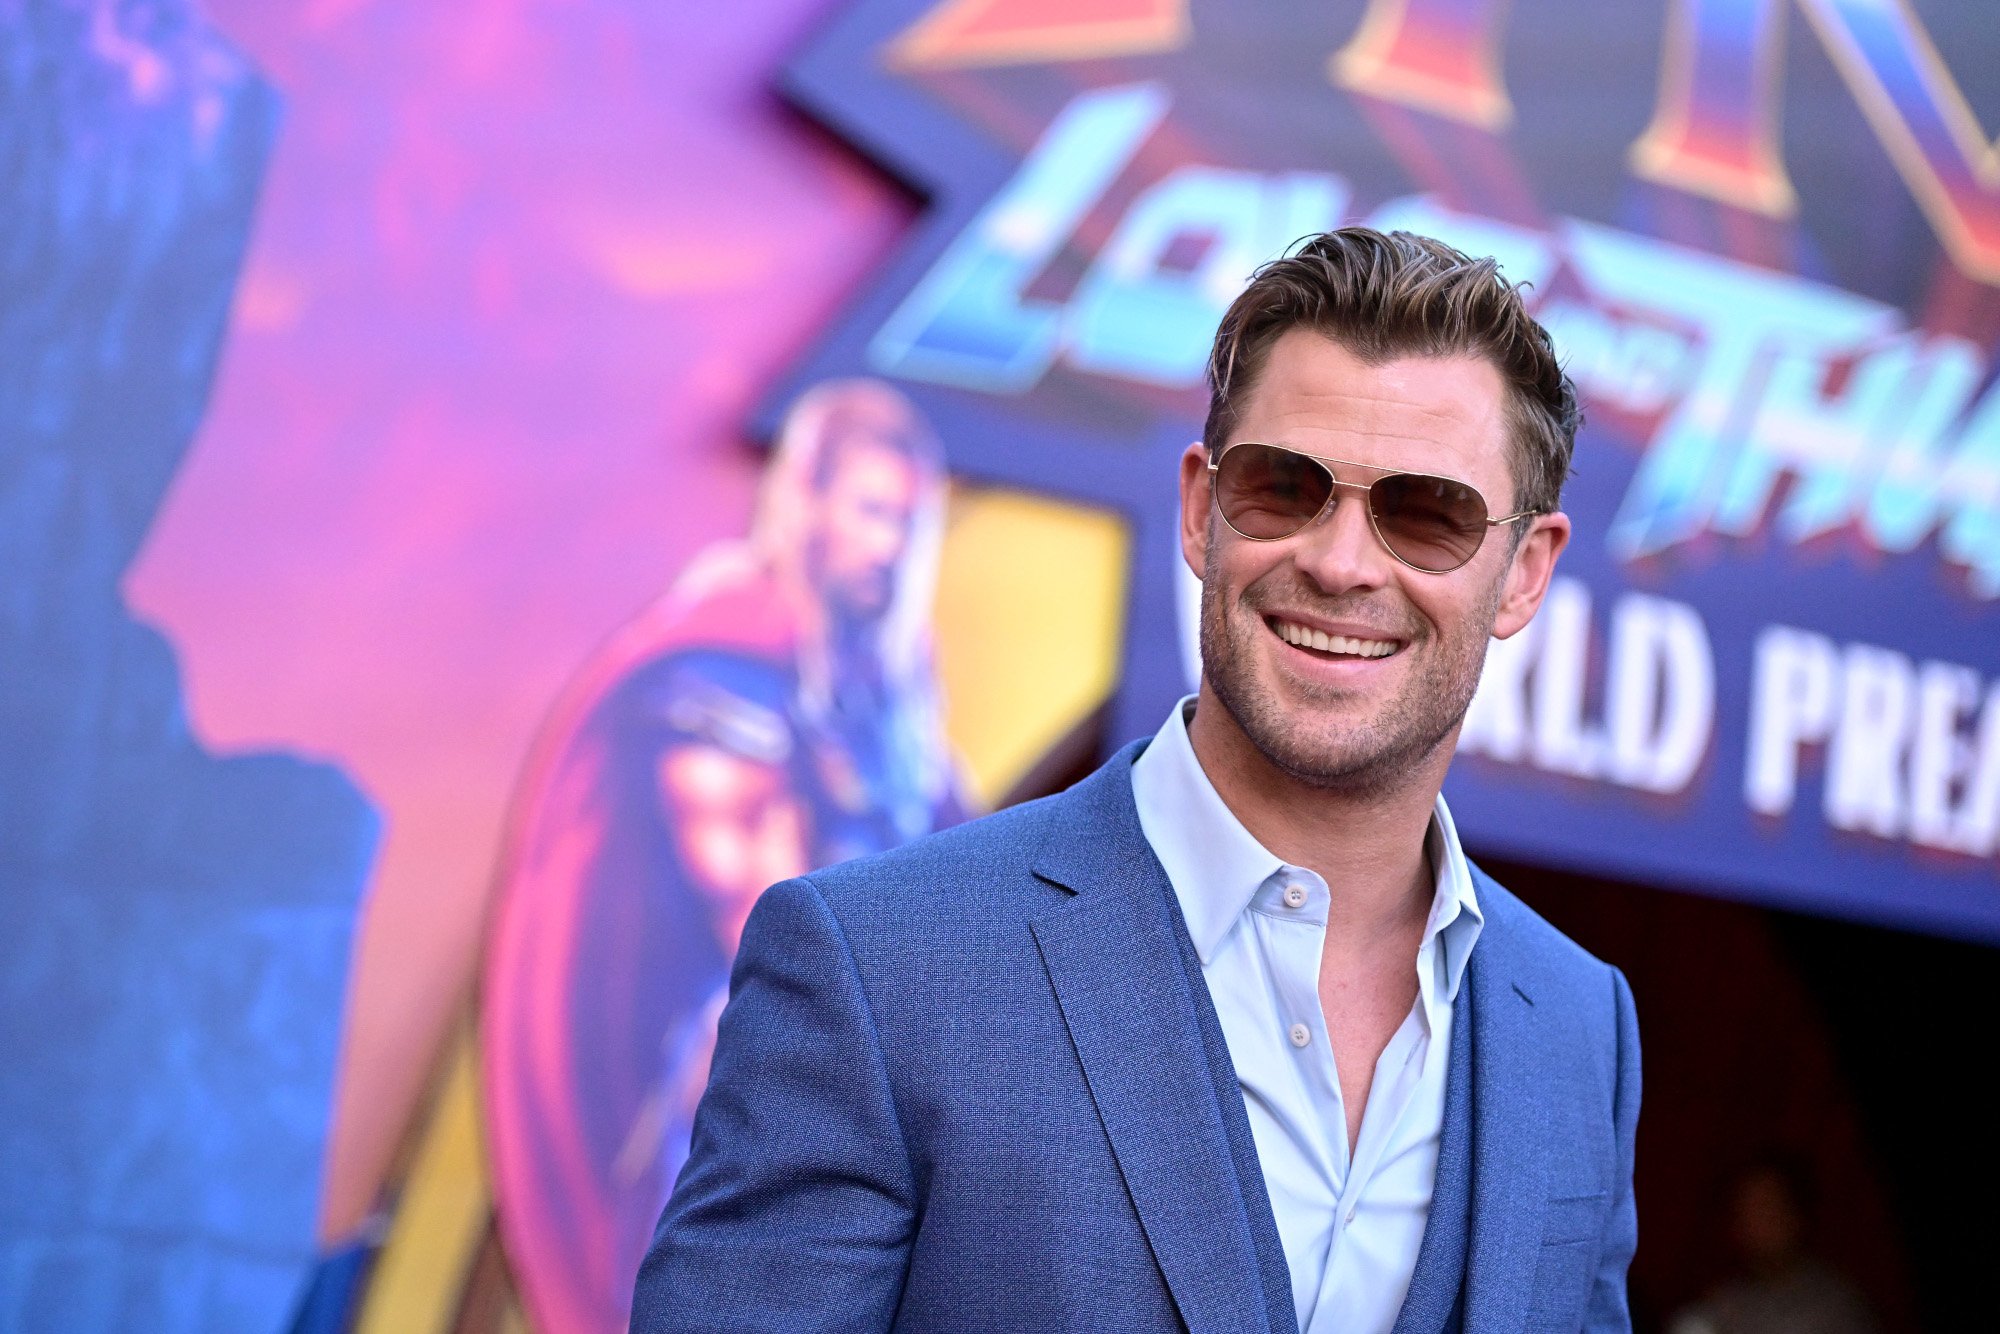 Chris Hemsworth, who waited 10 years for his naked butt scene in 'Thor: Love and Thunder.' He's wearing sunglasses and smiling in this photo, with a blue button-up shirt and jacket on.